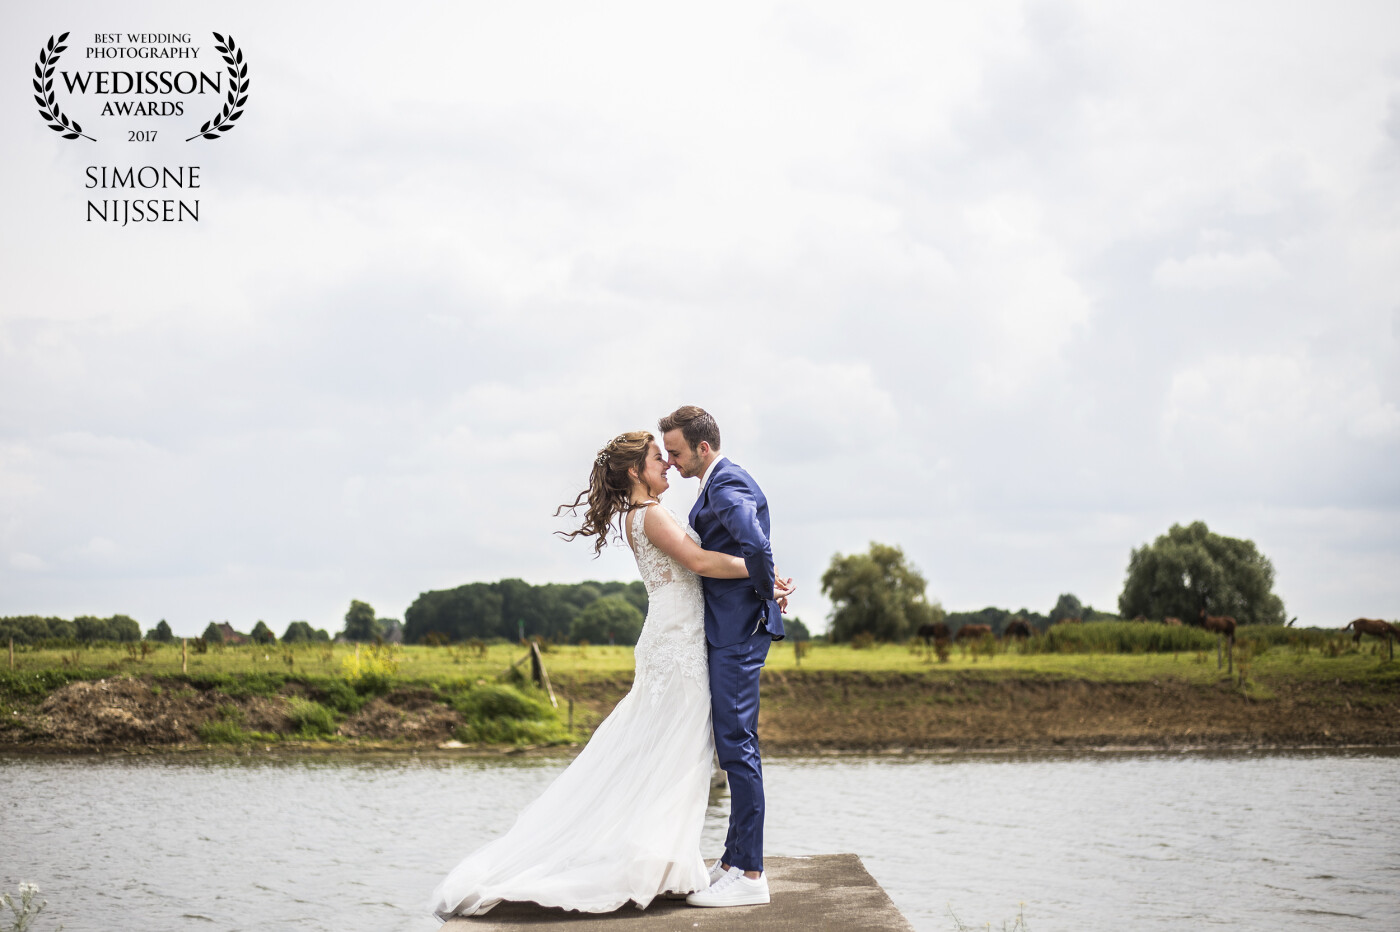 When we were walking alongside the river IJssel in Brummen (Netherlands), i saw this platform which was partly broken above the river. When i asked my bride and groom if they would dare to step on the broken platform they yelled "hell yeah" and they both stepped on it and started cuddeling eachother. Such an awesome moment! 